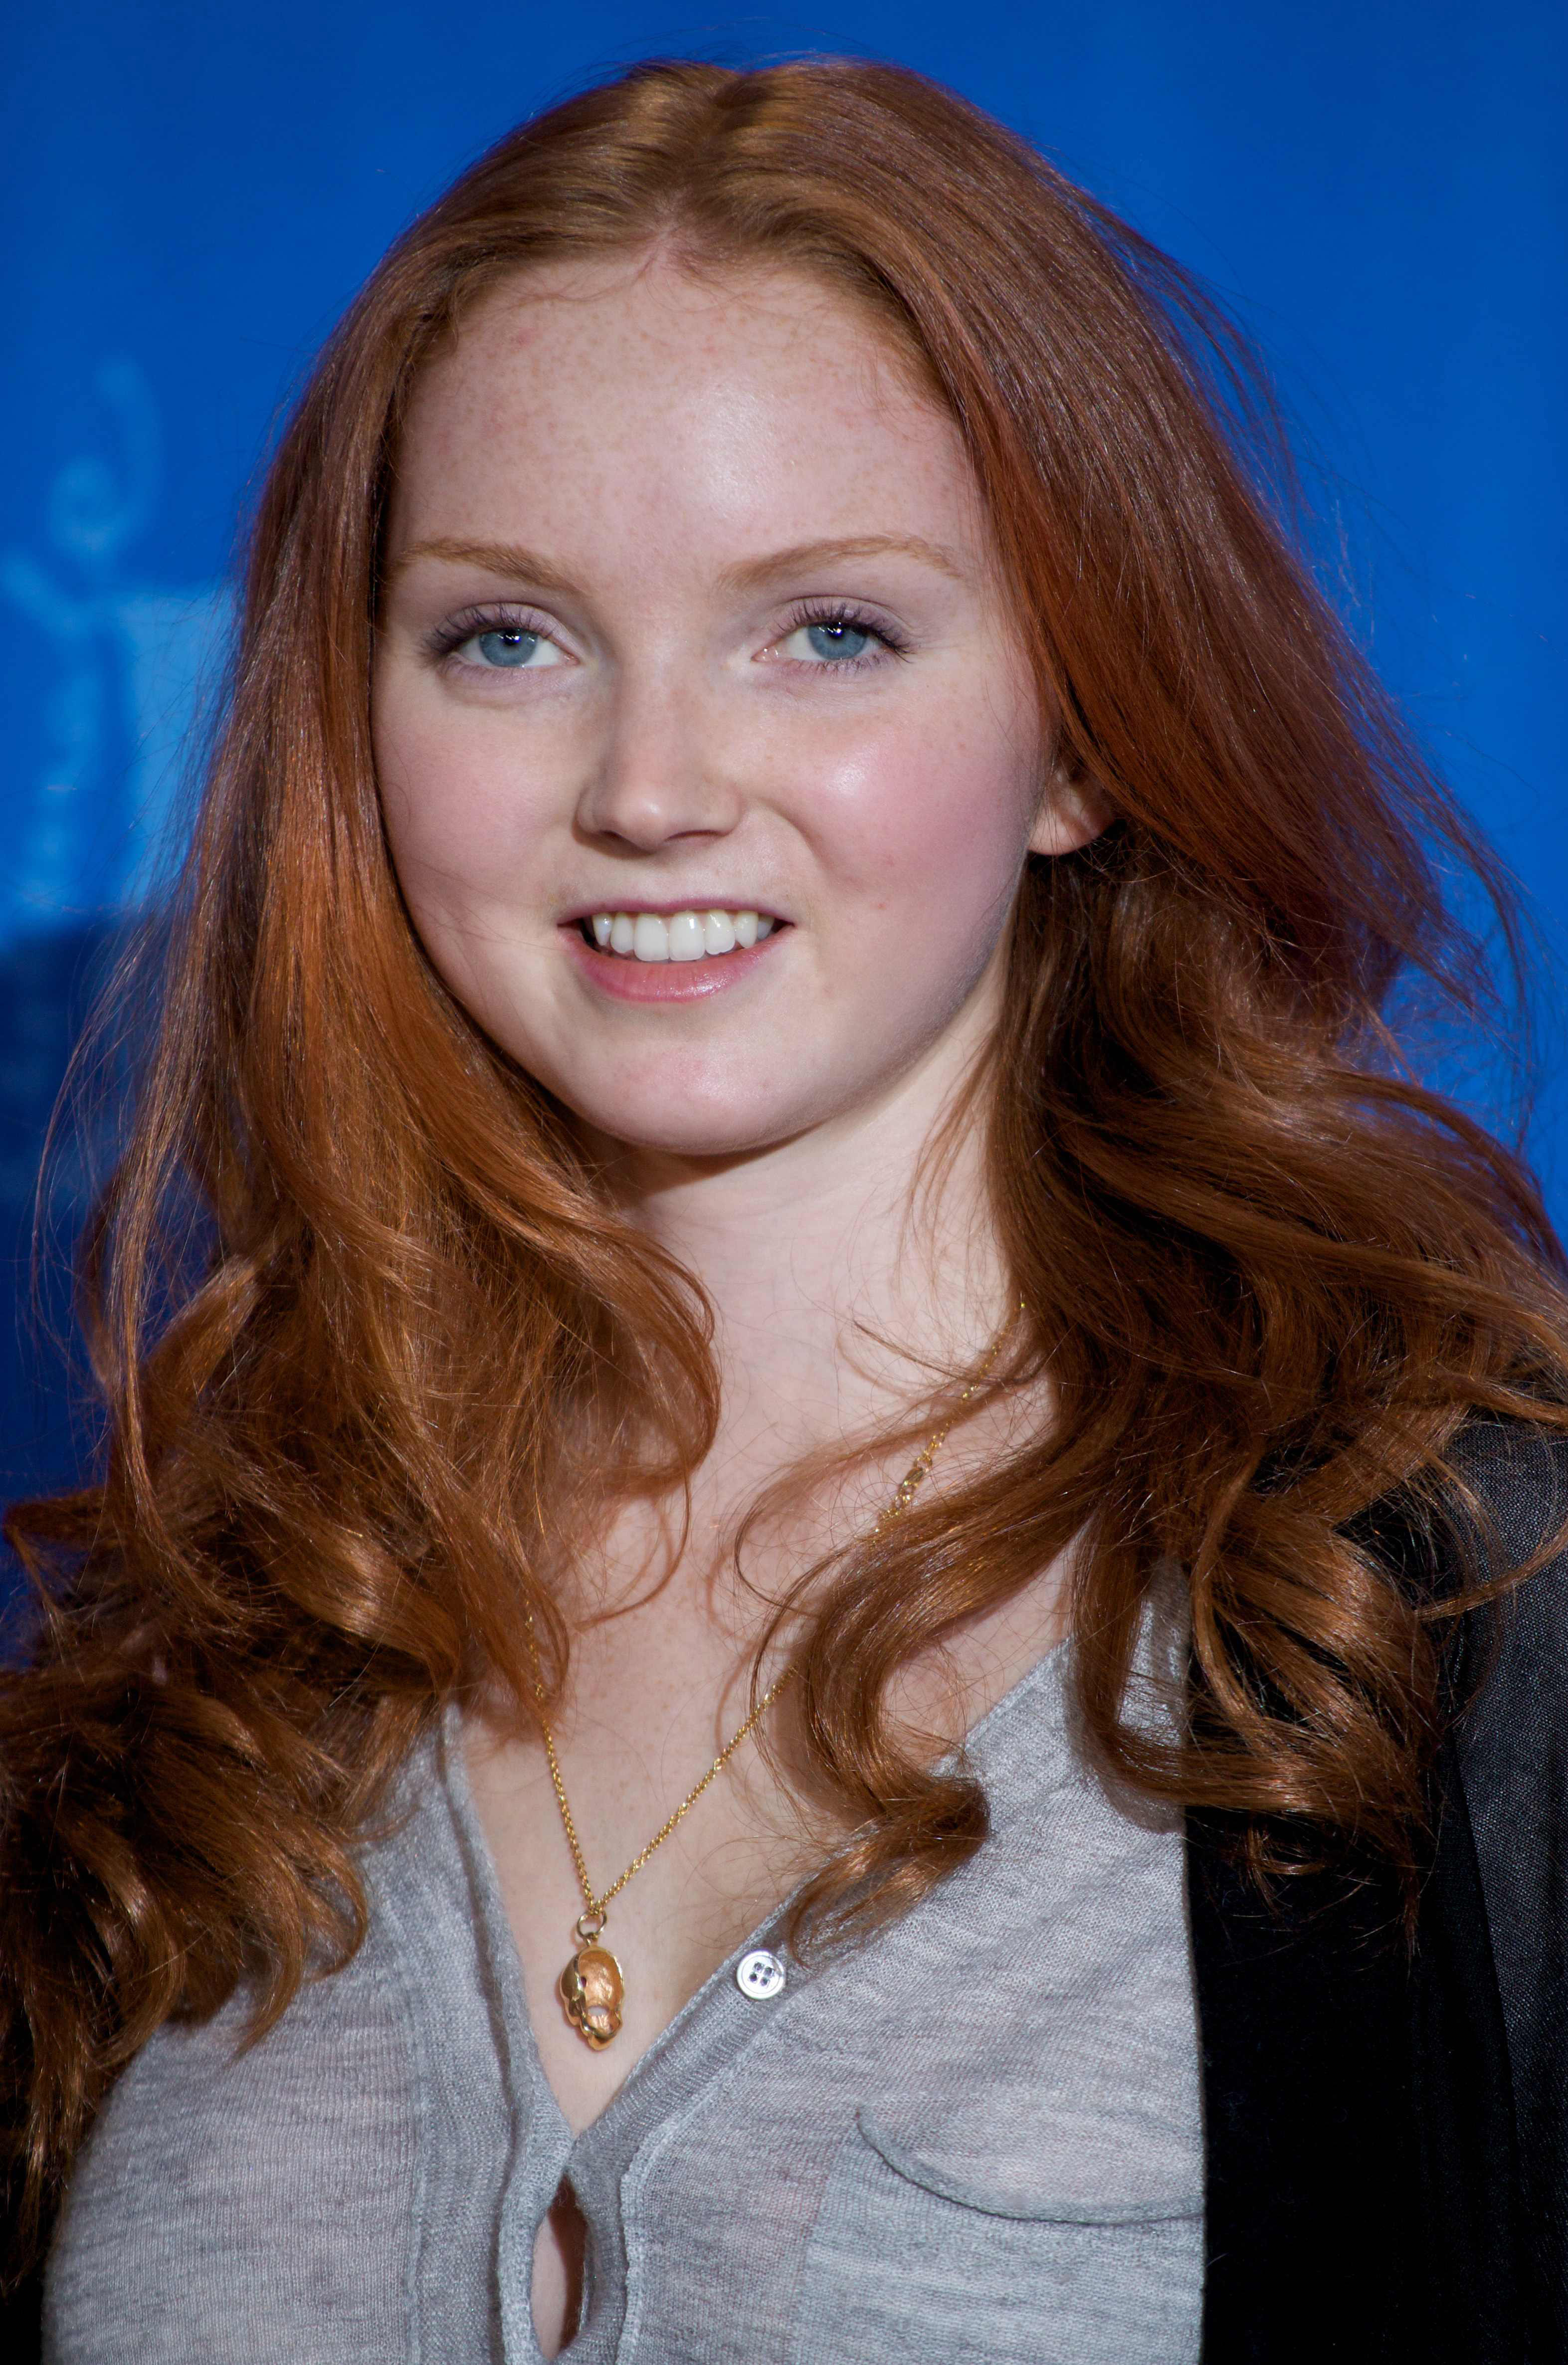 Lily Cole HD wallpapers, Desktop wallpaper - most viewed